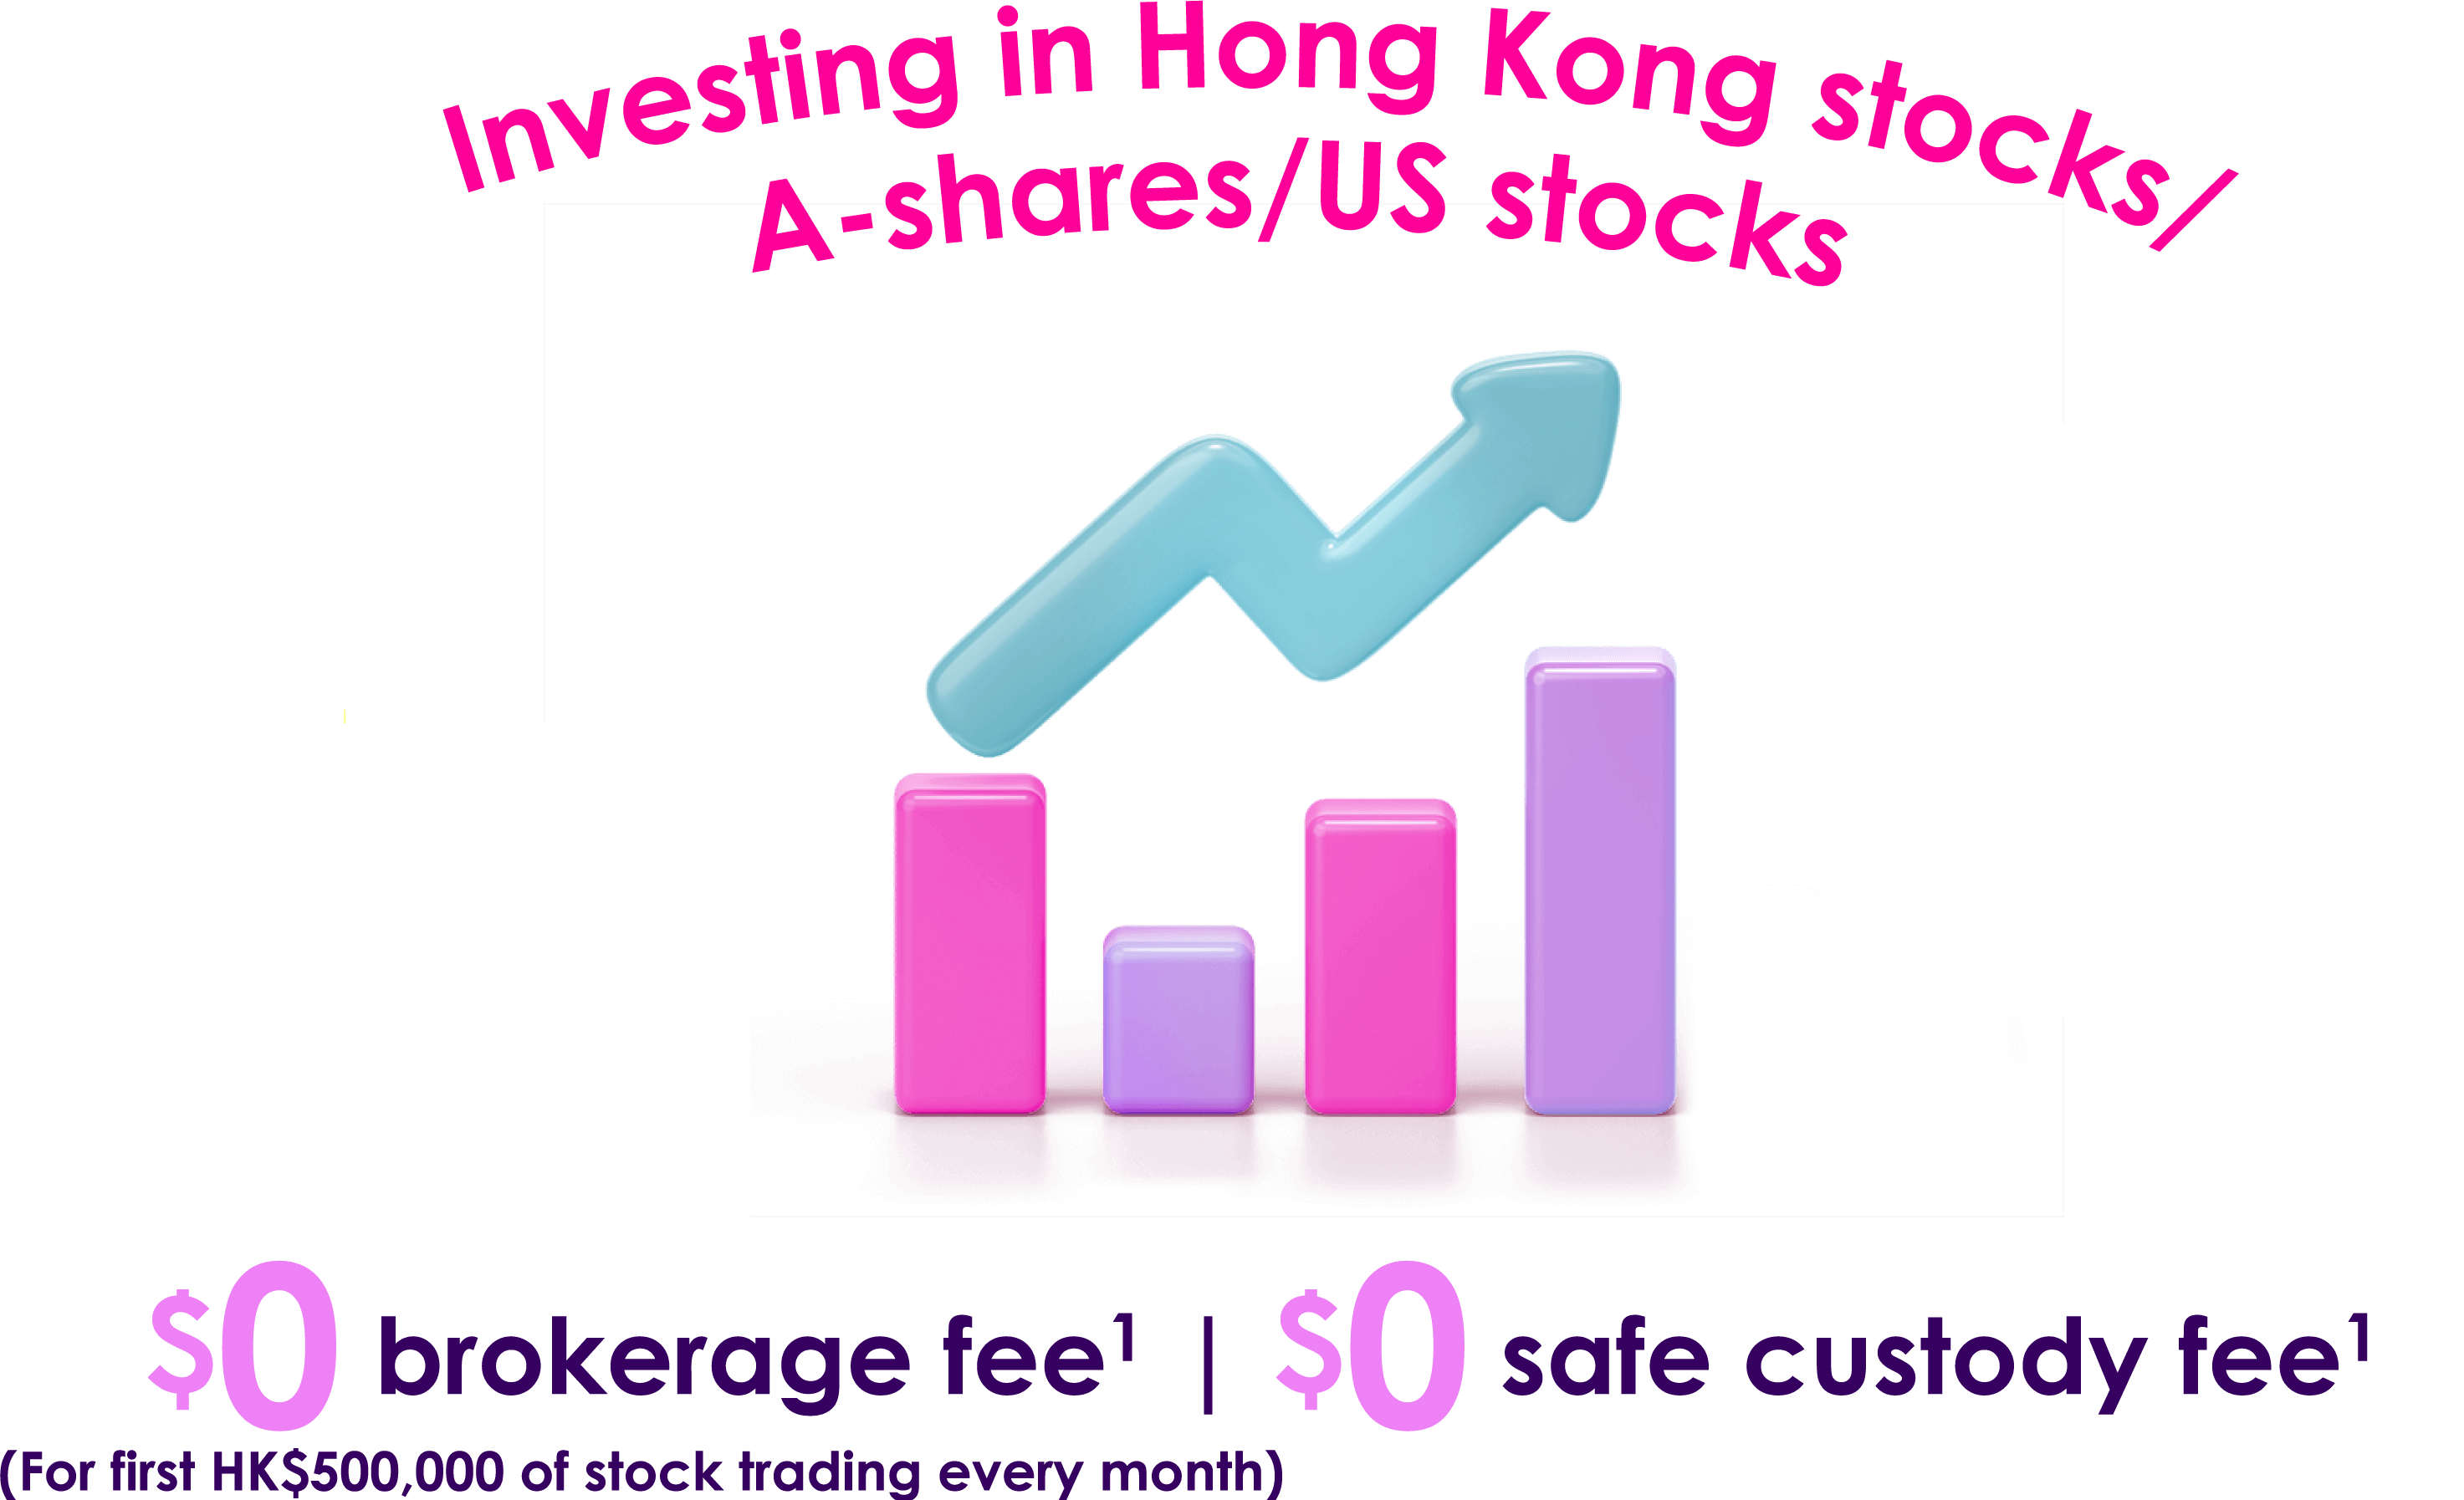 Investing in Hong Kong stocks/A-shares/US stocks HK$0 brokerage fee (for first HK$500,000 of stock trading every month) HK$0 safe custody fee